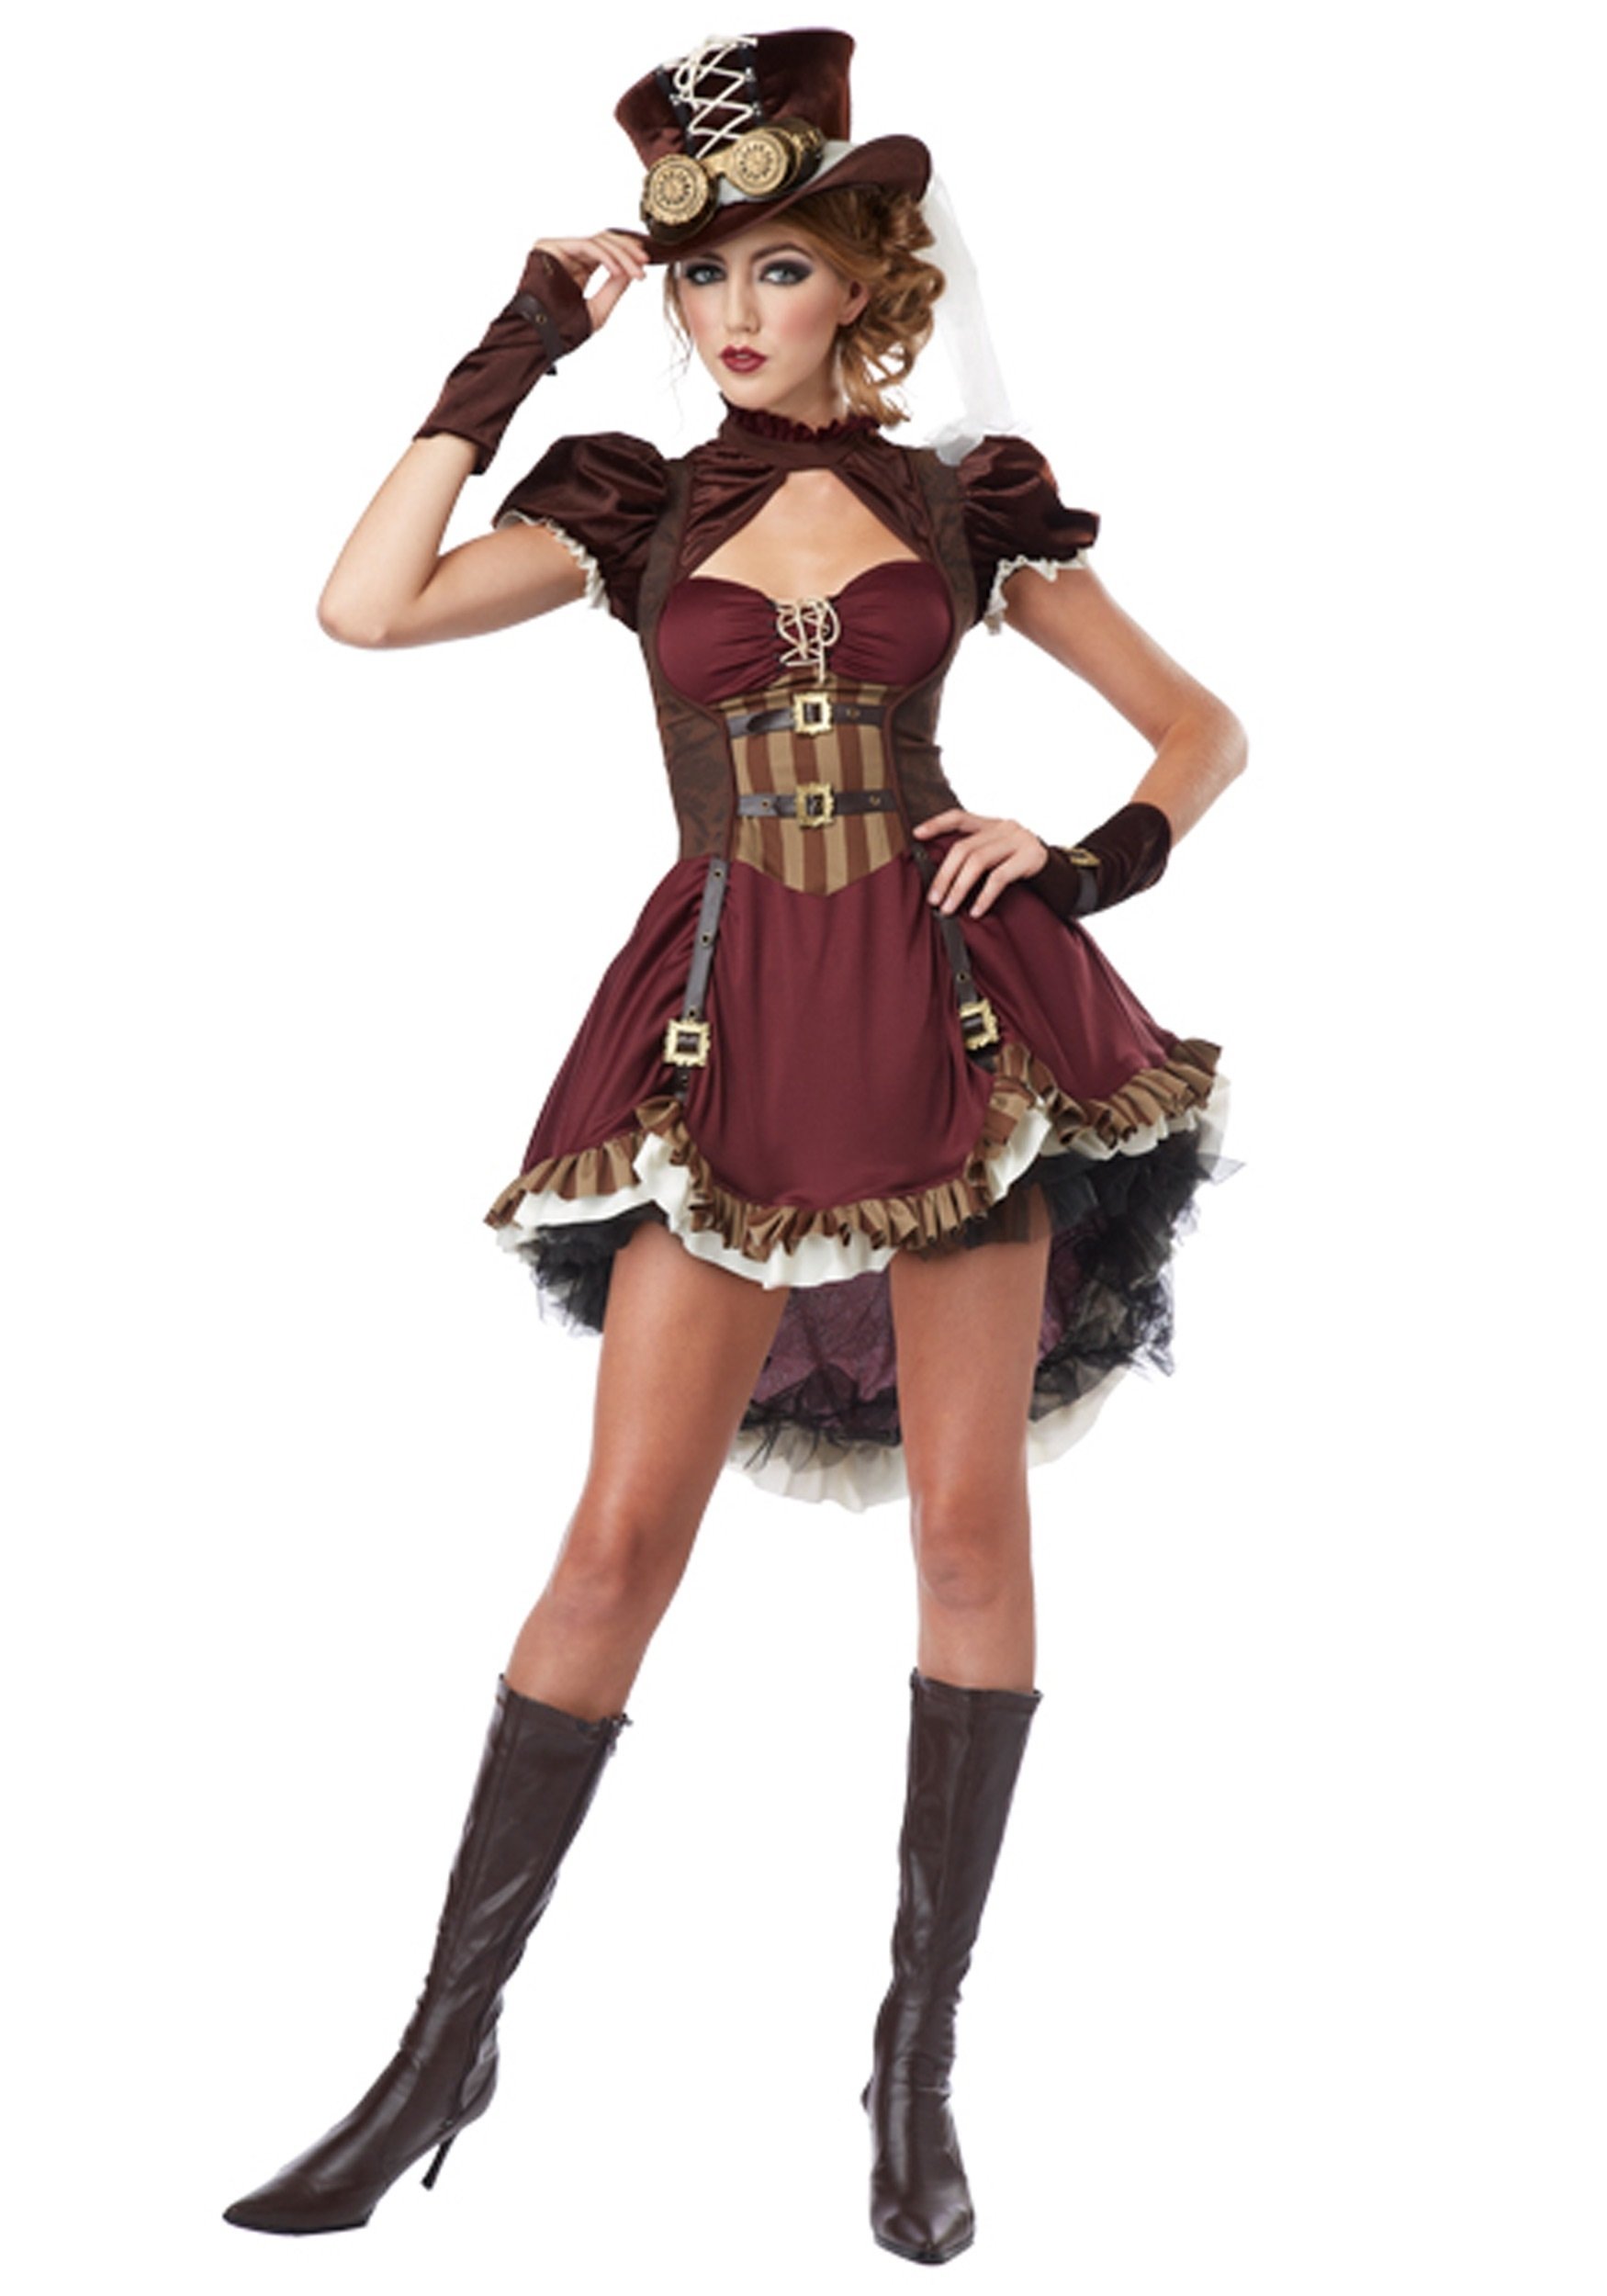 10 Most Popular Cute Halloween Costume Ideas For Teenage Girls steampunk costumes victorian steampunk fashion costumes 2022